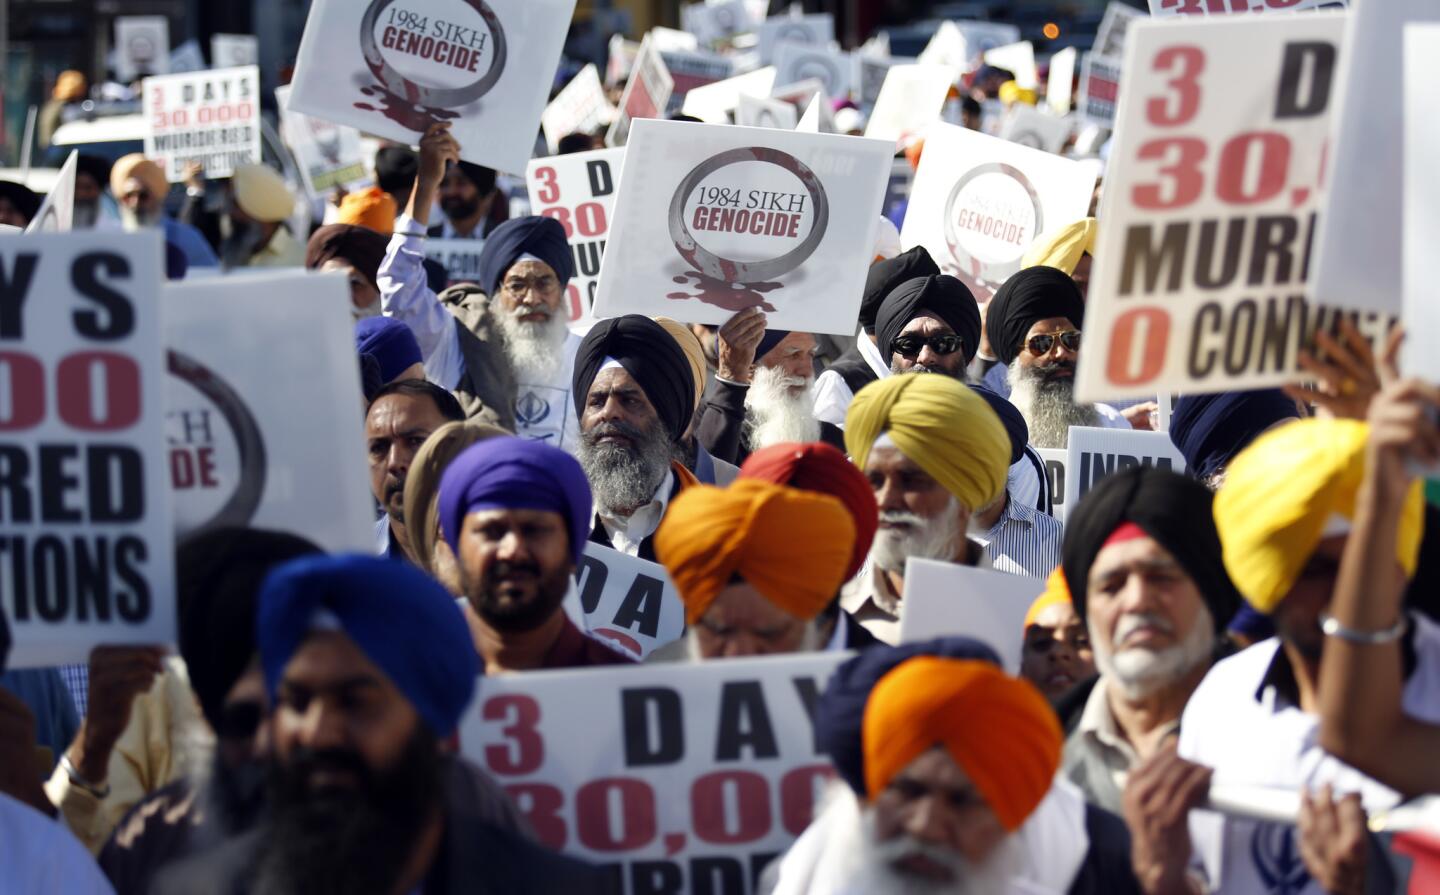 Hundreds of Sikhs marched from the Beverly Center to the Los Angeles Museum of the Holocaust on Saturday to mark the 1984 anti-Sikh massacre and protest human rights violations in India.